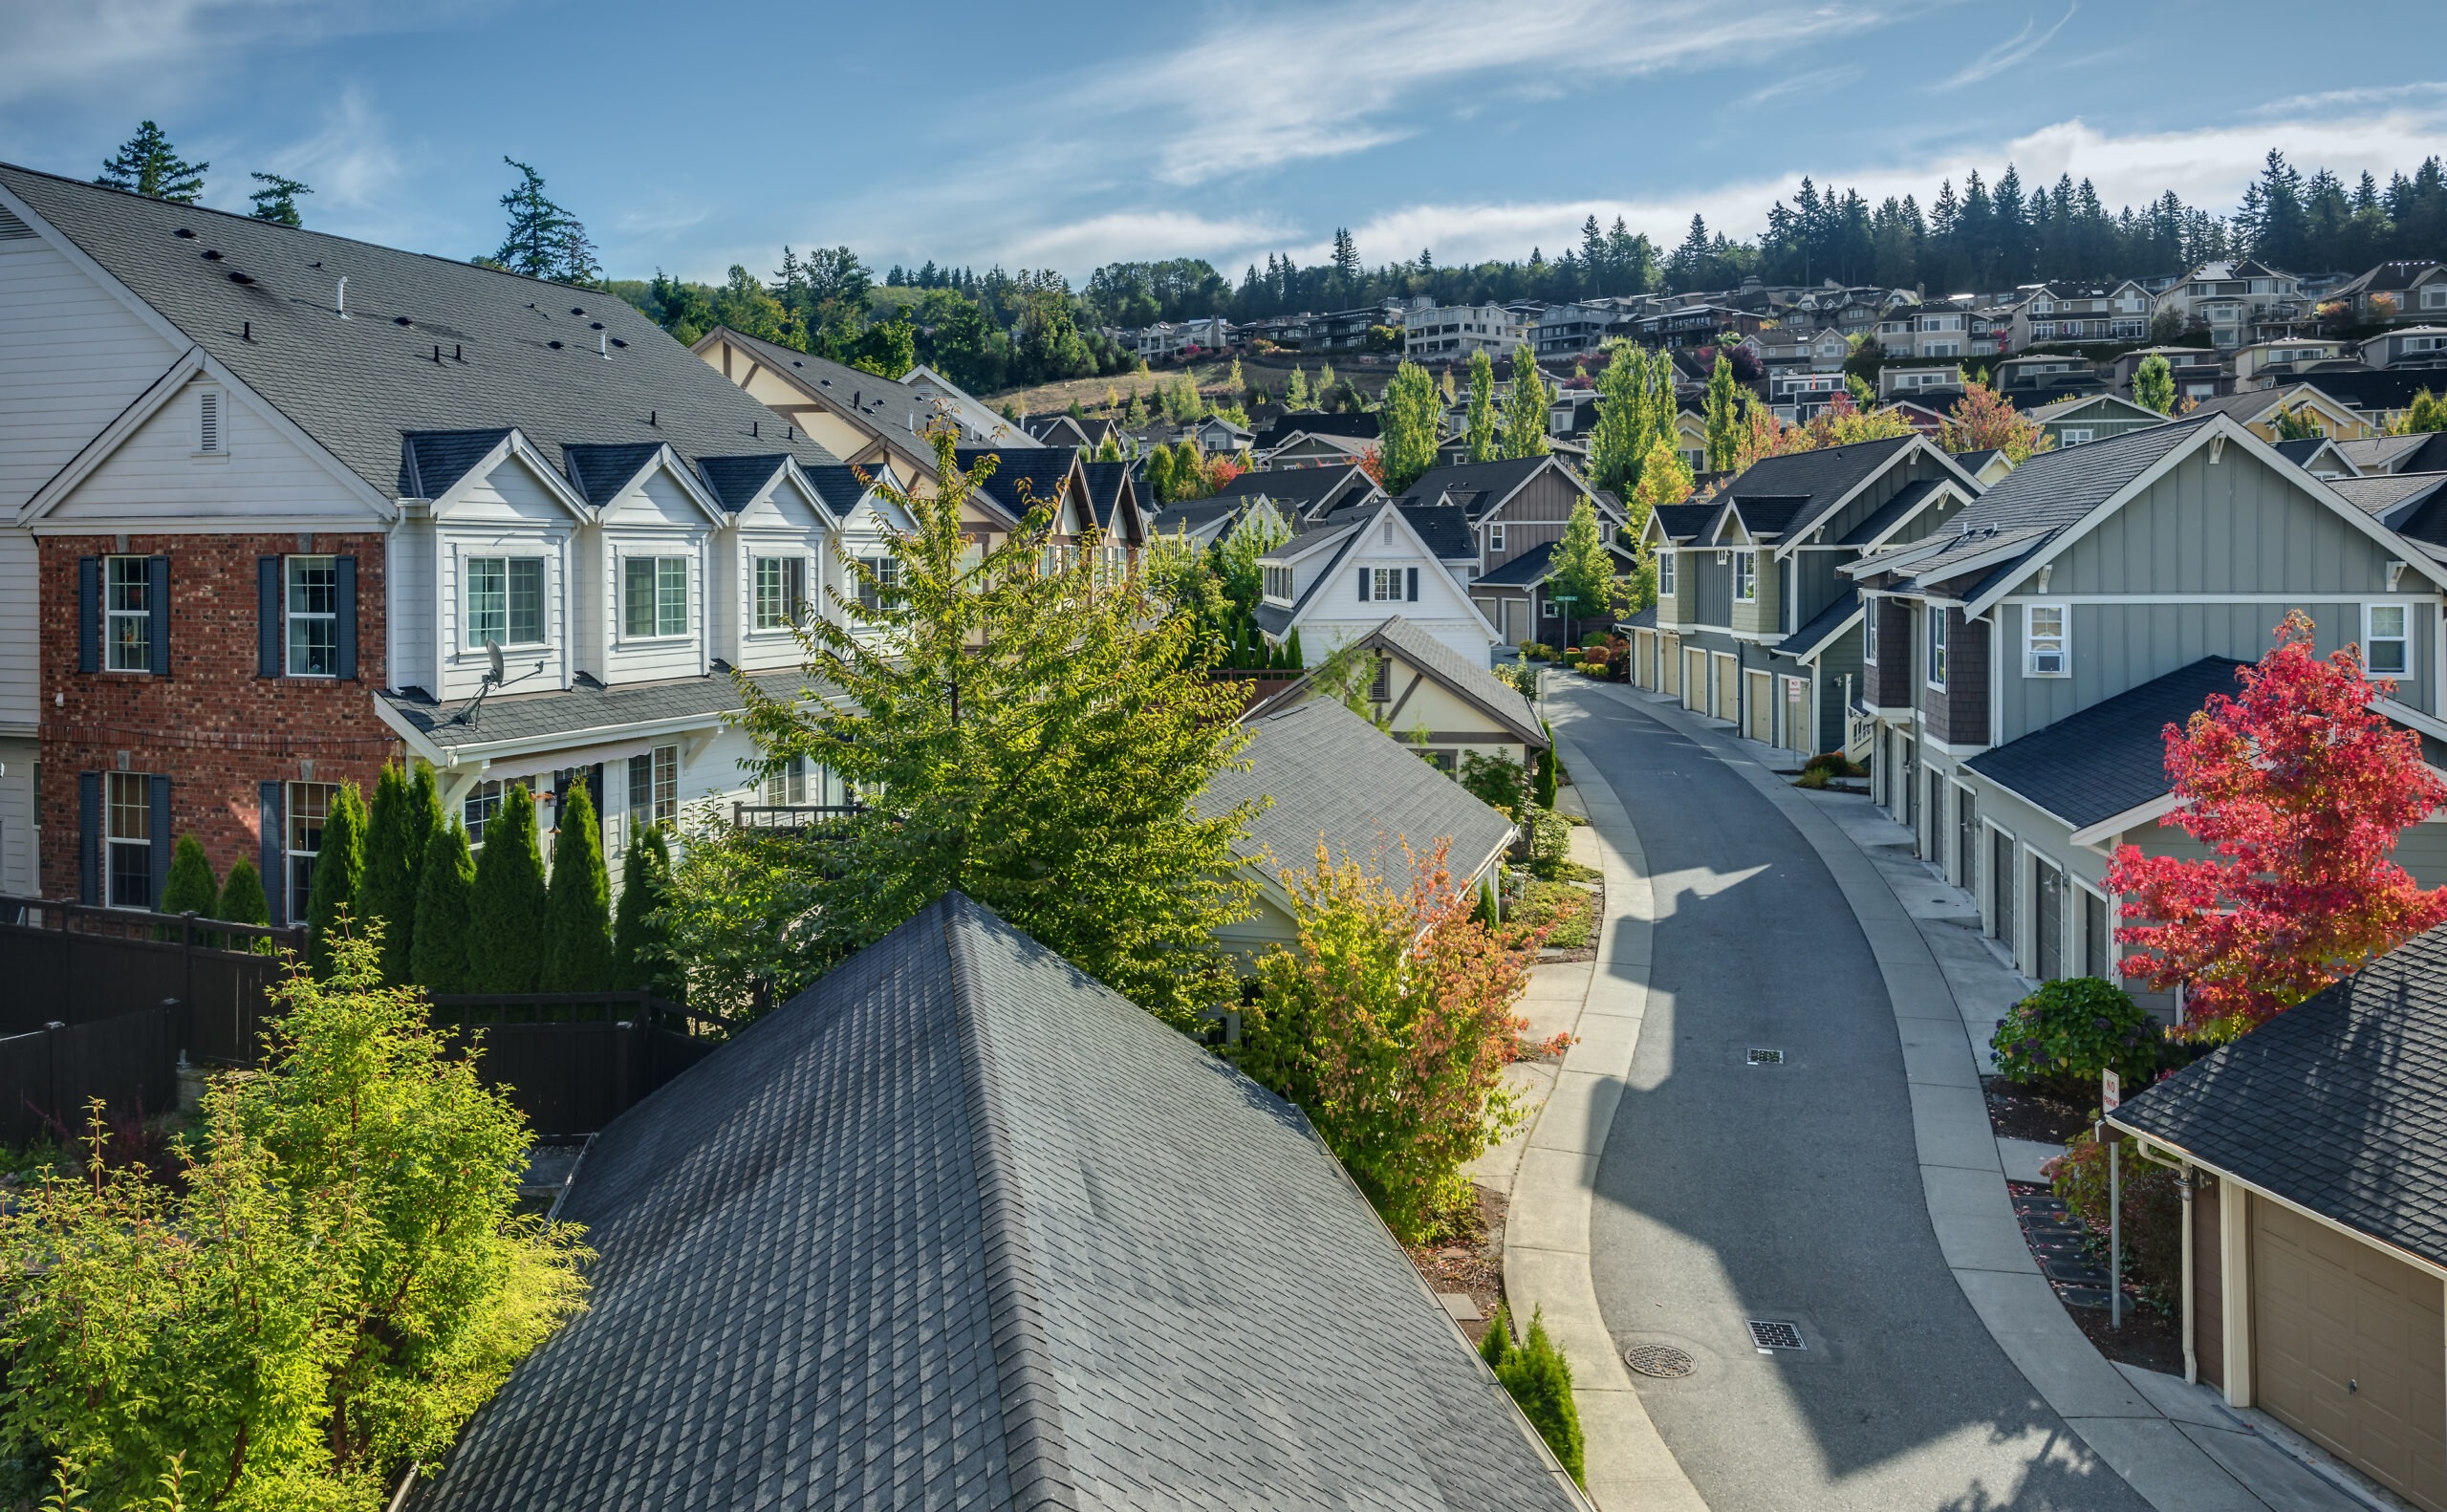 Discover LendSure's tailored loan products designed to meet the demands of the Northwest's real estate market and empower your business growth